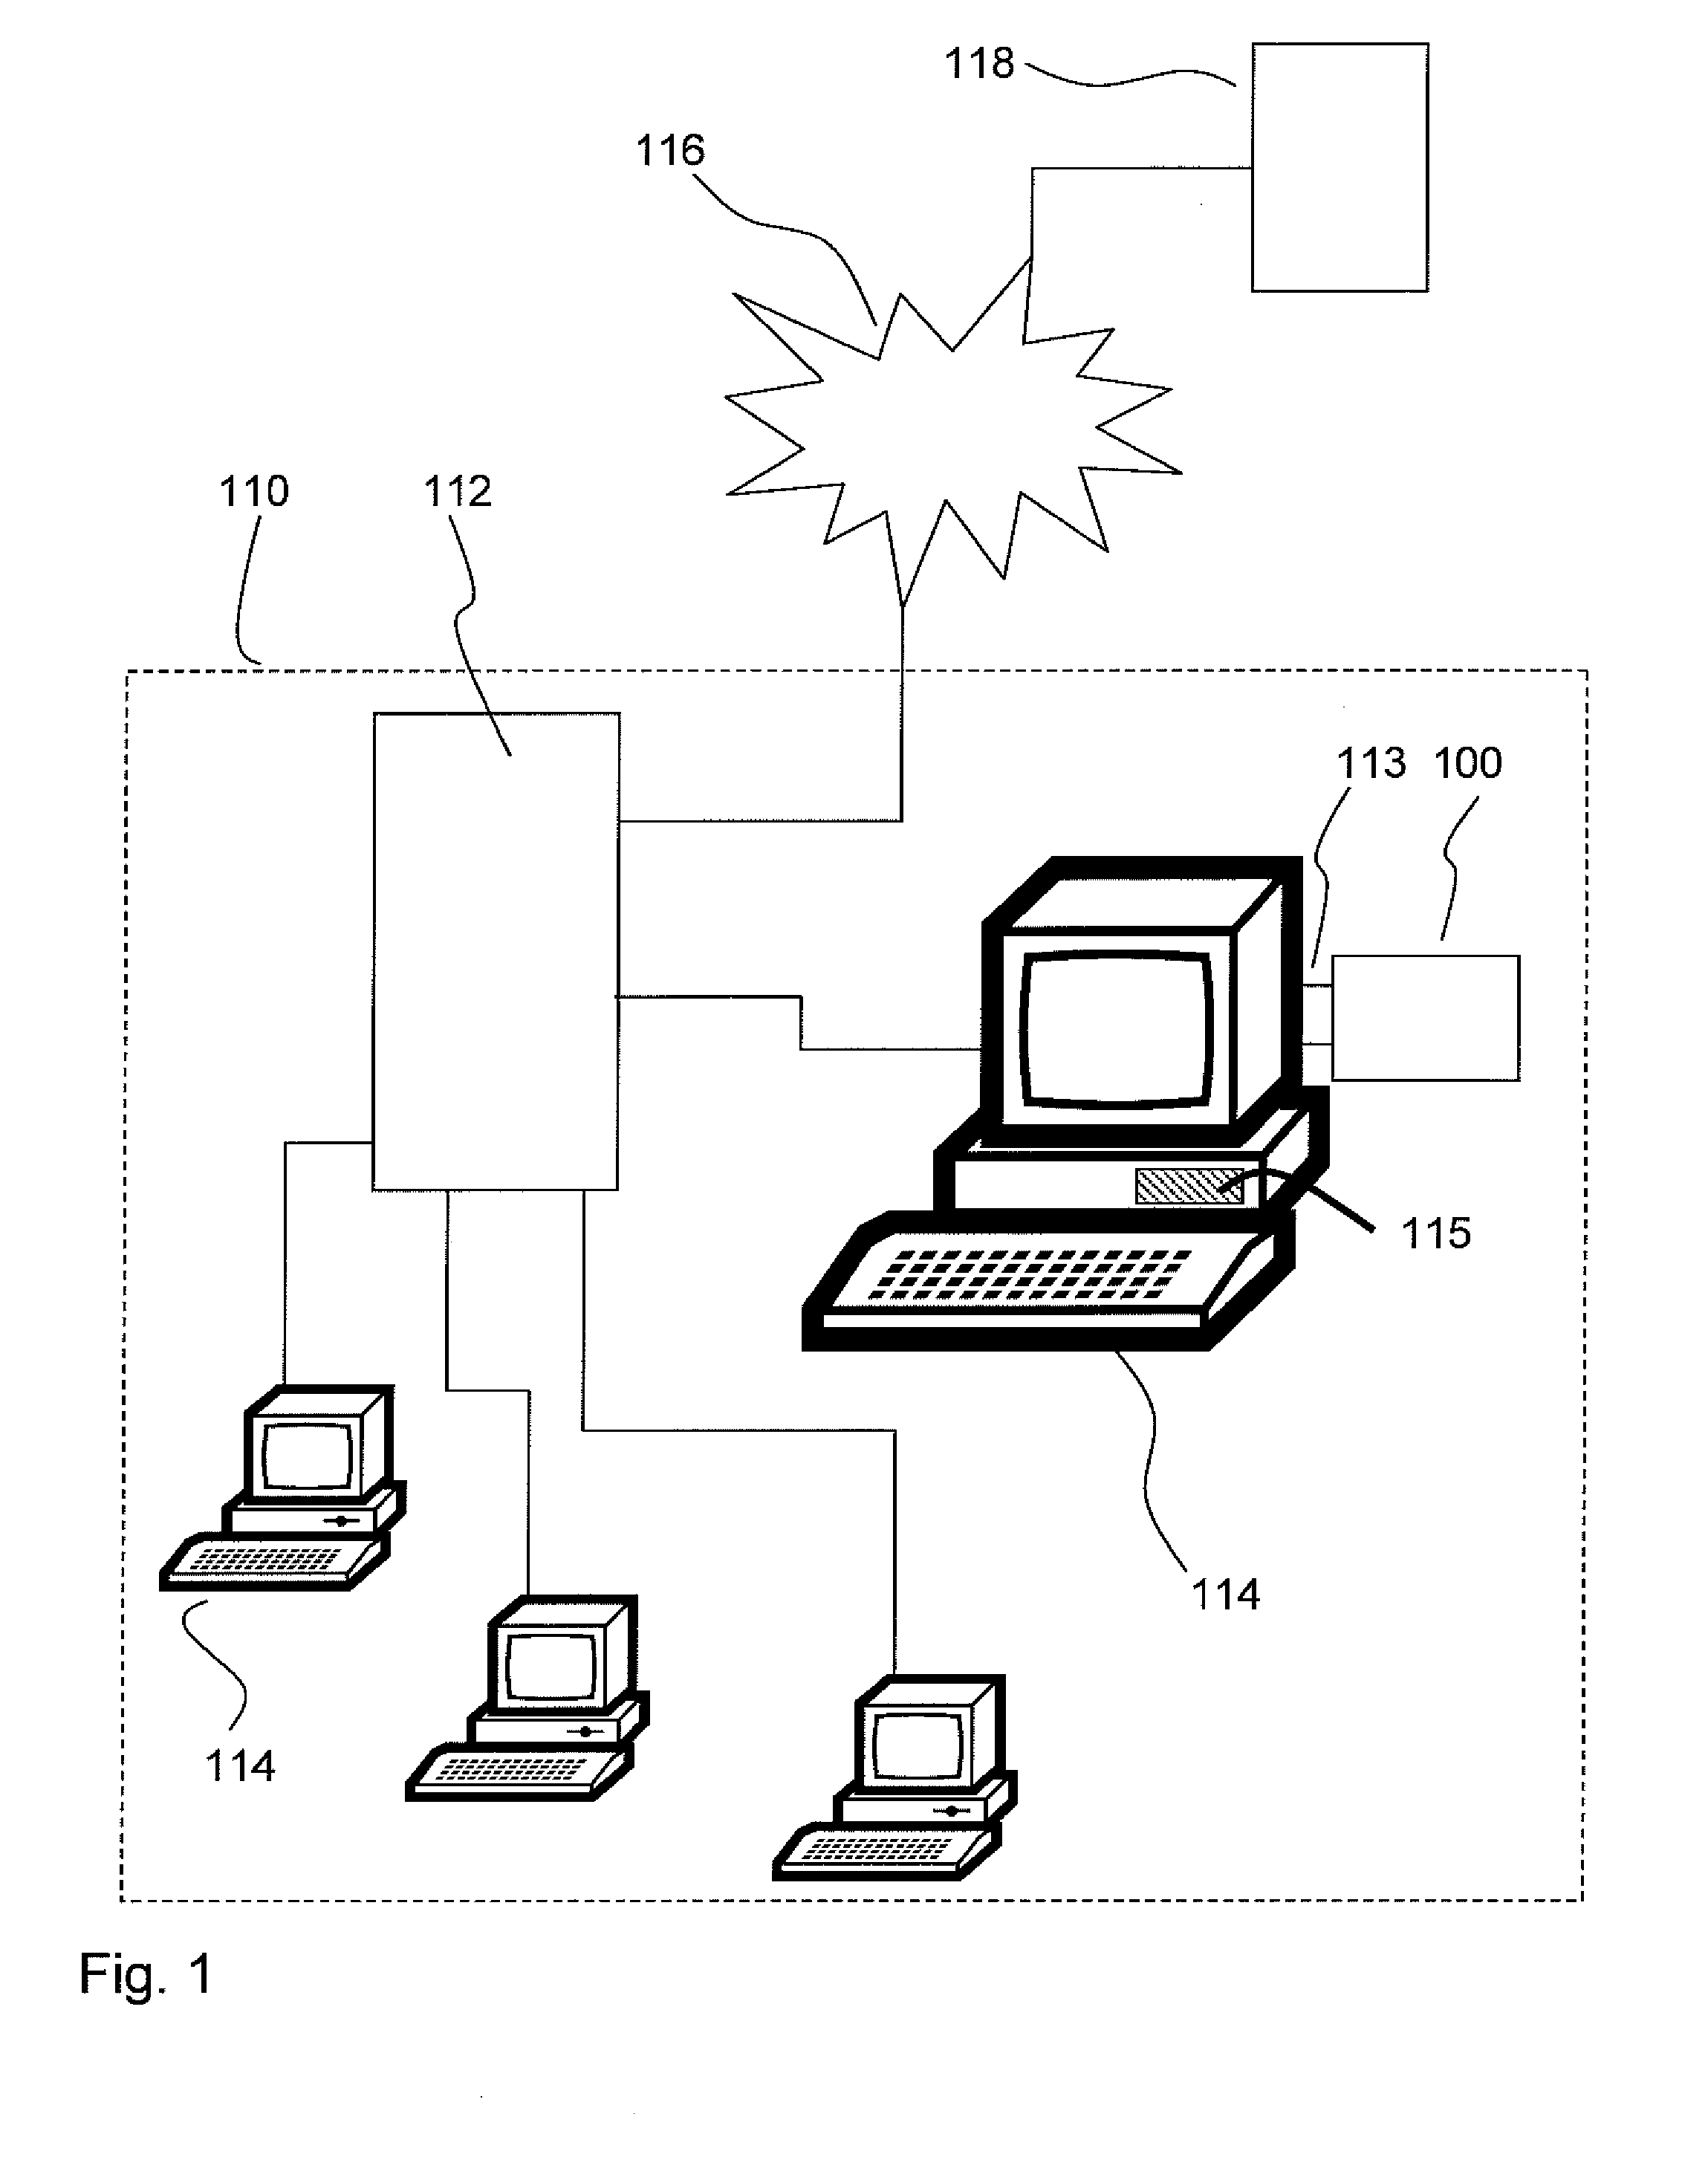 Method and system for secure flexible software licensing